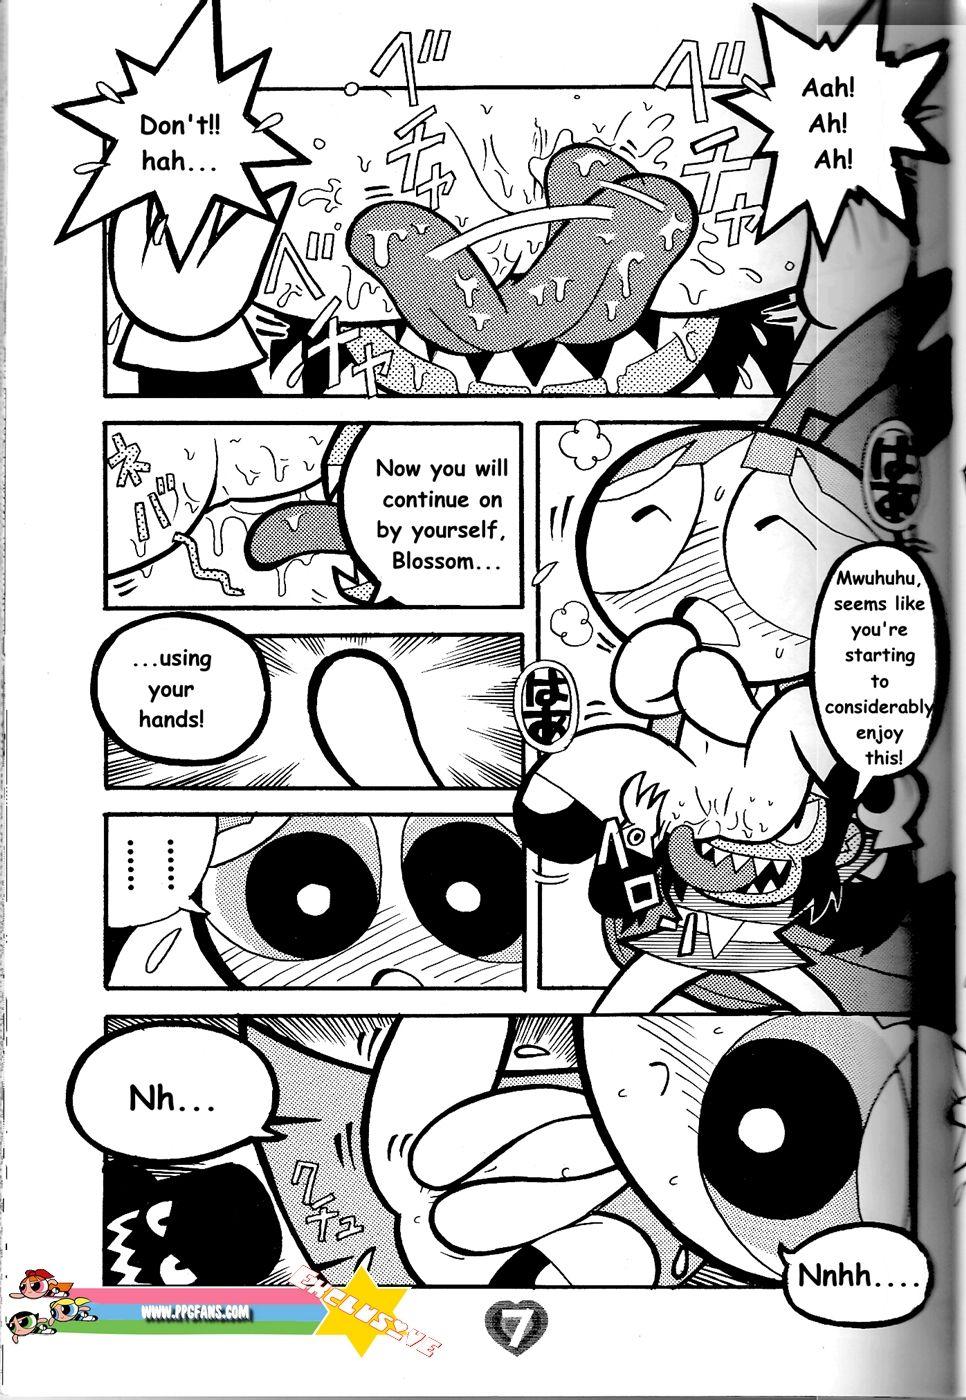 Foreplay THE PUFF PUFF GIRLS - The powerpuff girls Softcore - Page 8